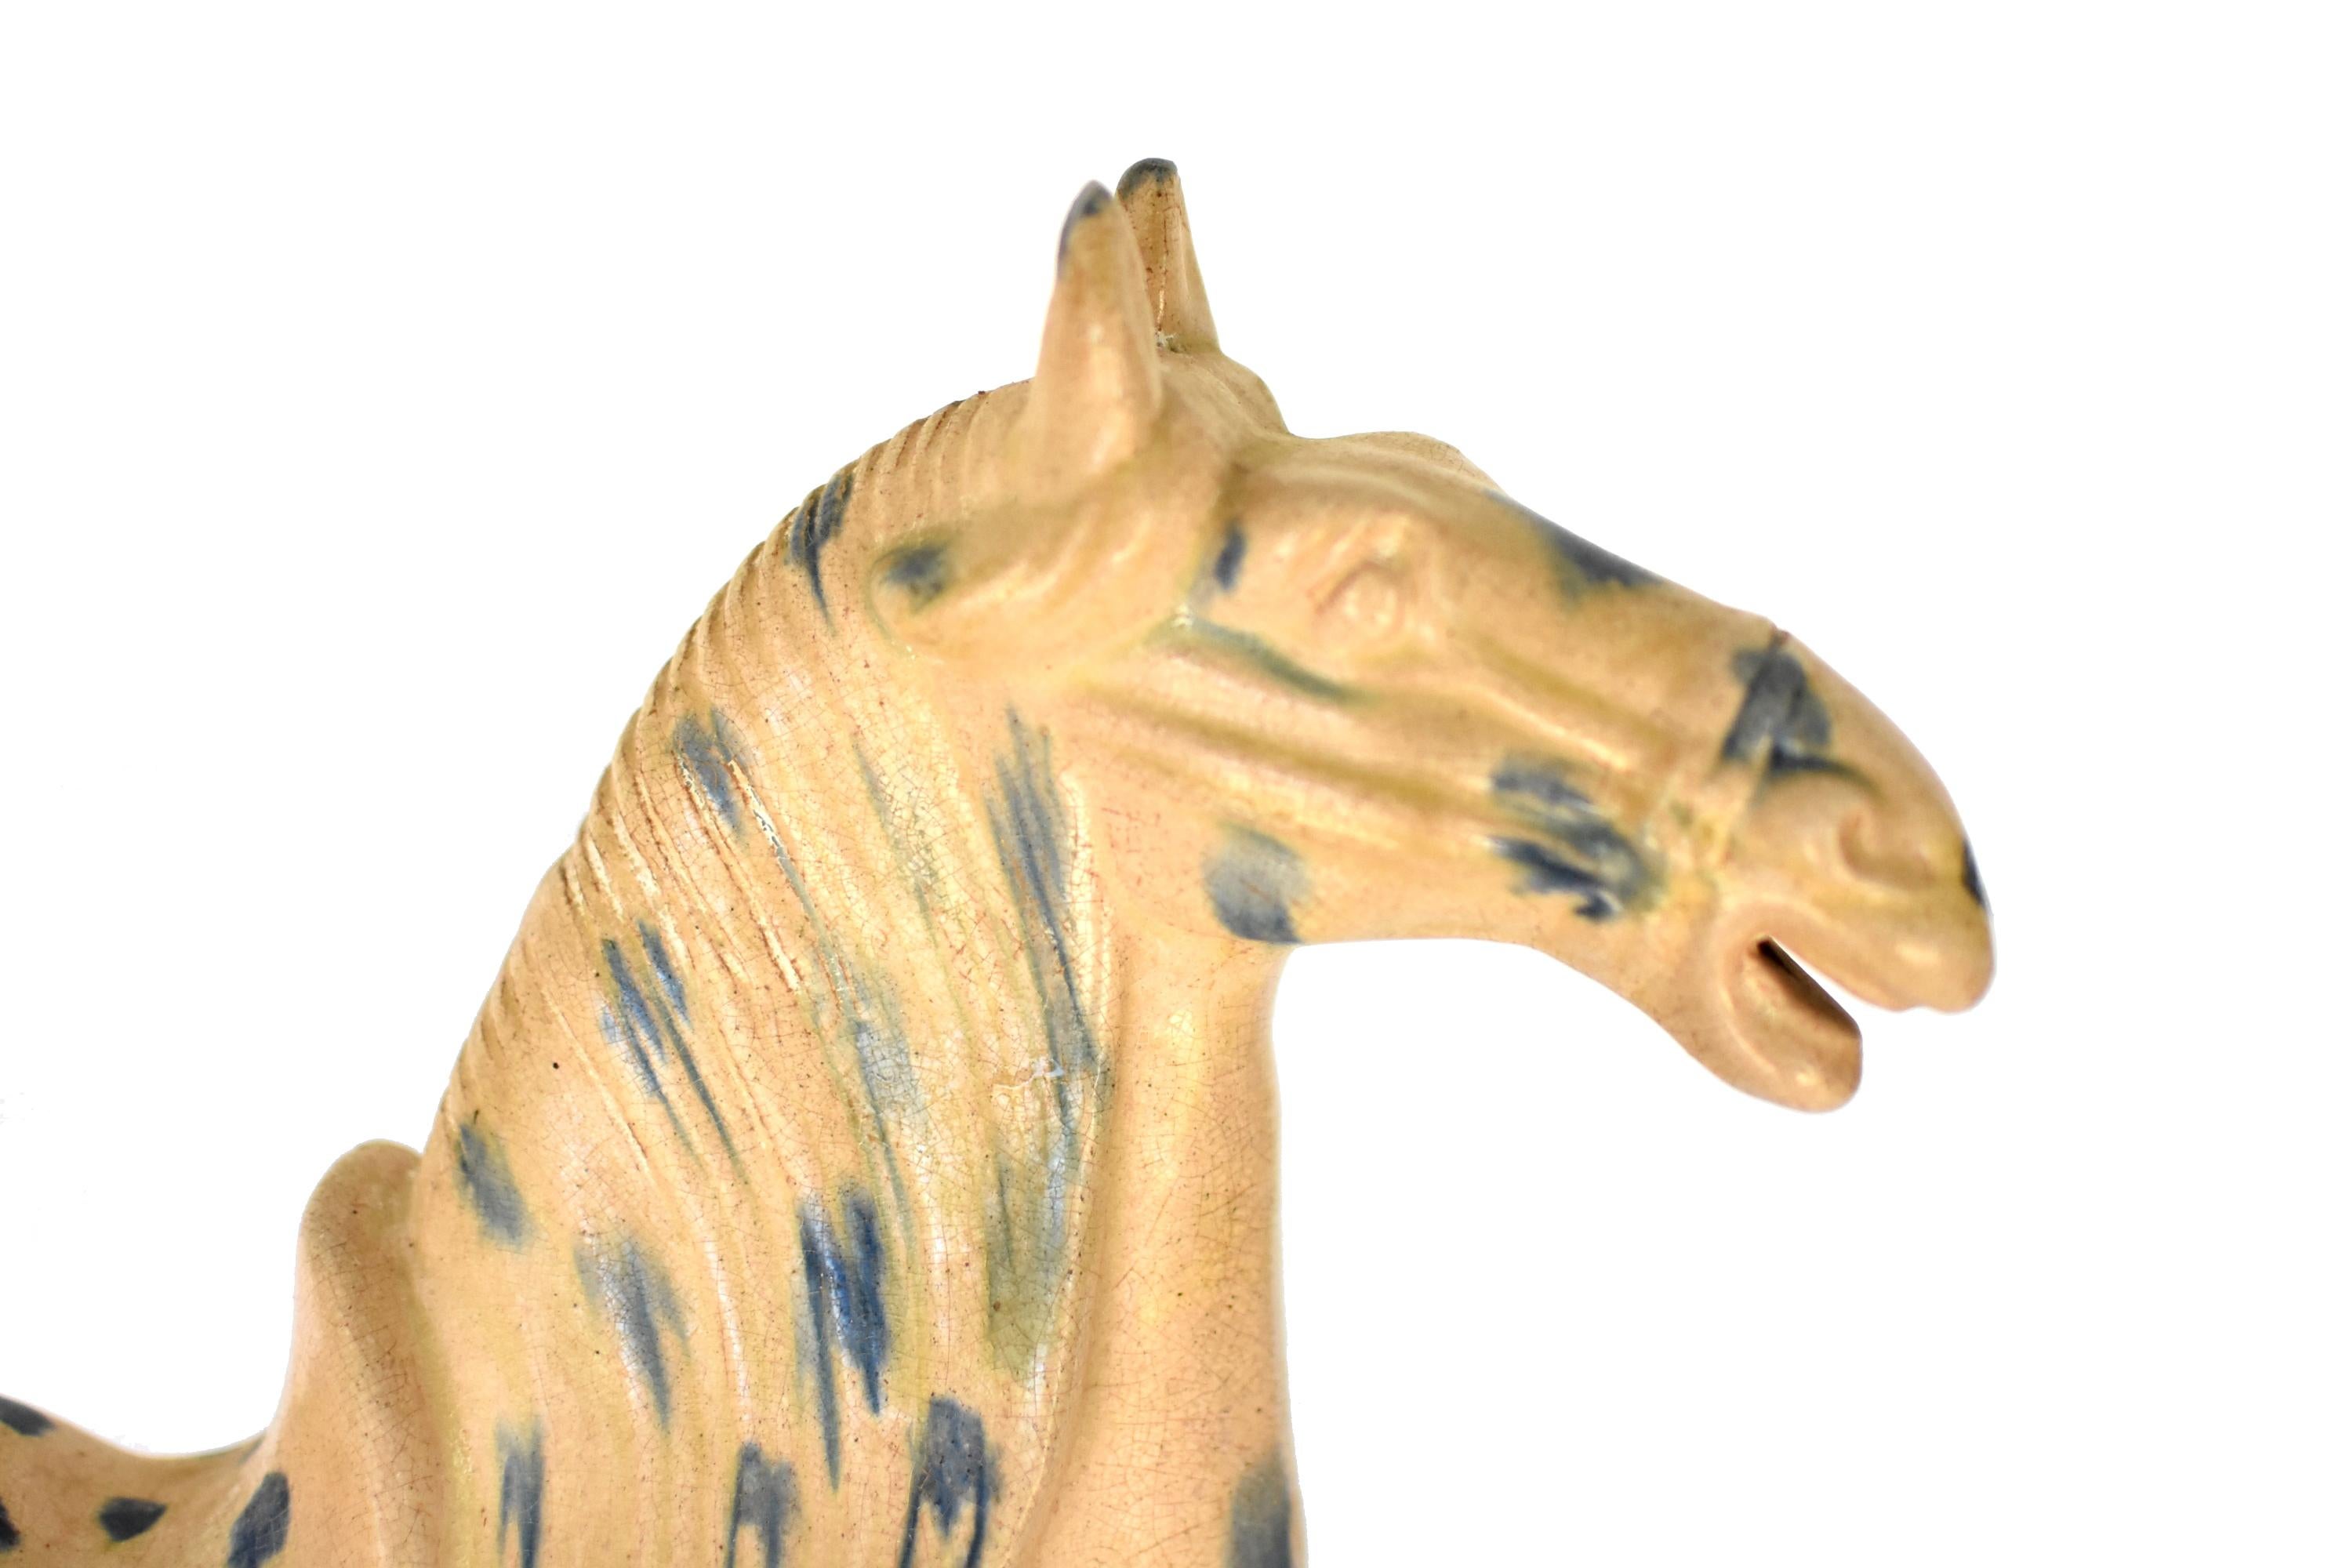 A majestic, large, white butterscotch San Cai horse in high gloss. The Sancai technique dates back to the Tang dynasty (618–907AD). This wonderful piece has all the hallmarks of Tang San Cai terracotta potteries with skillfully applied glaze